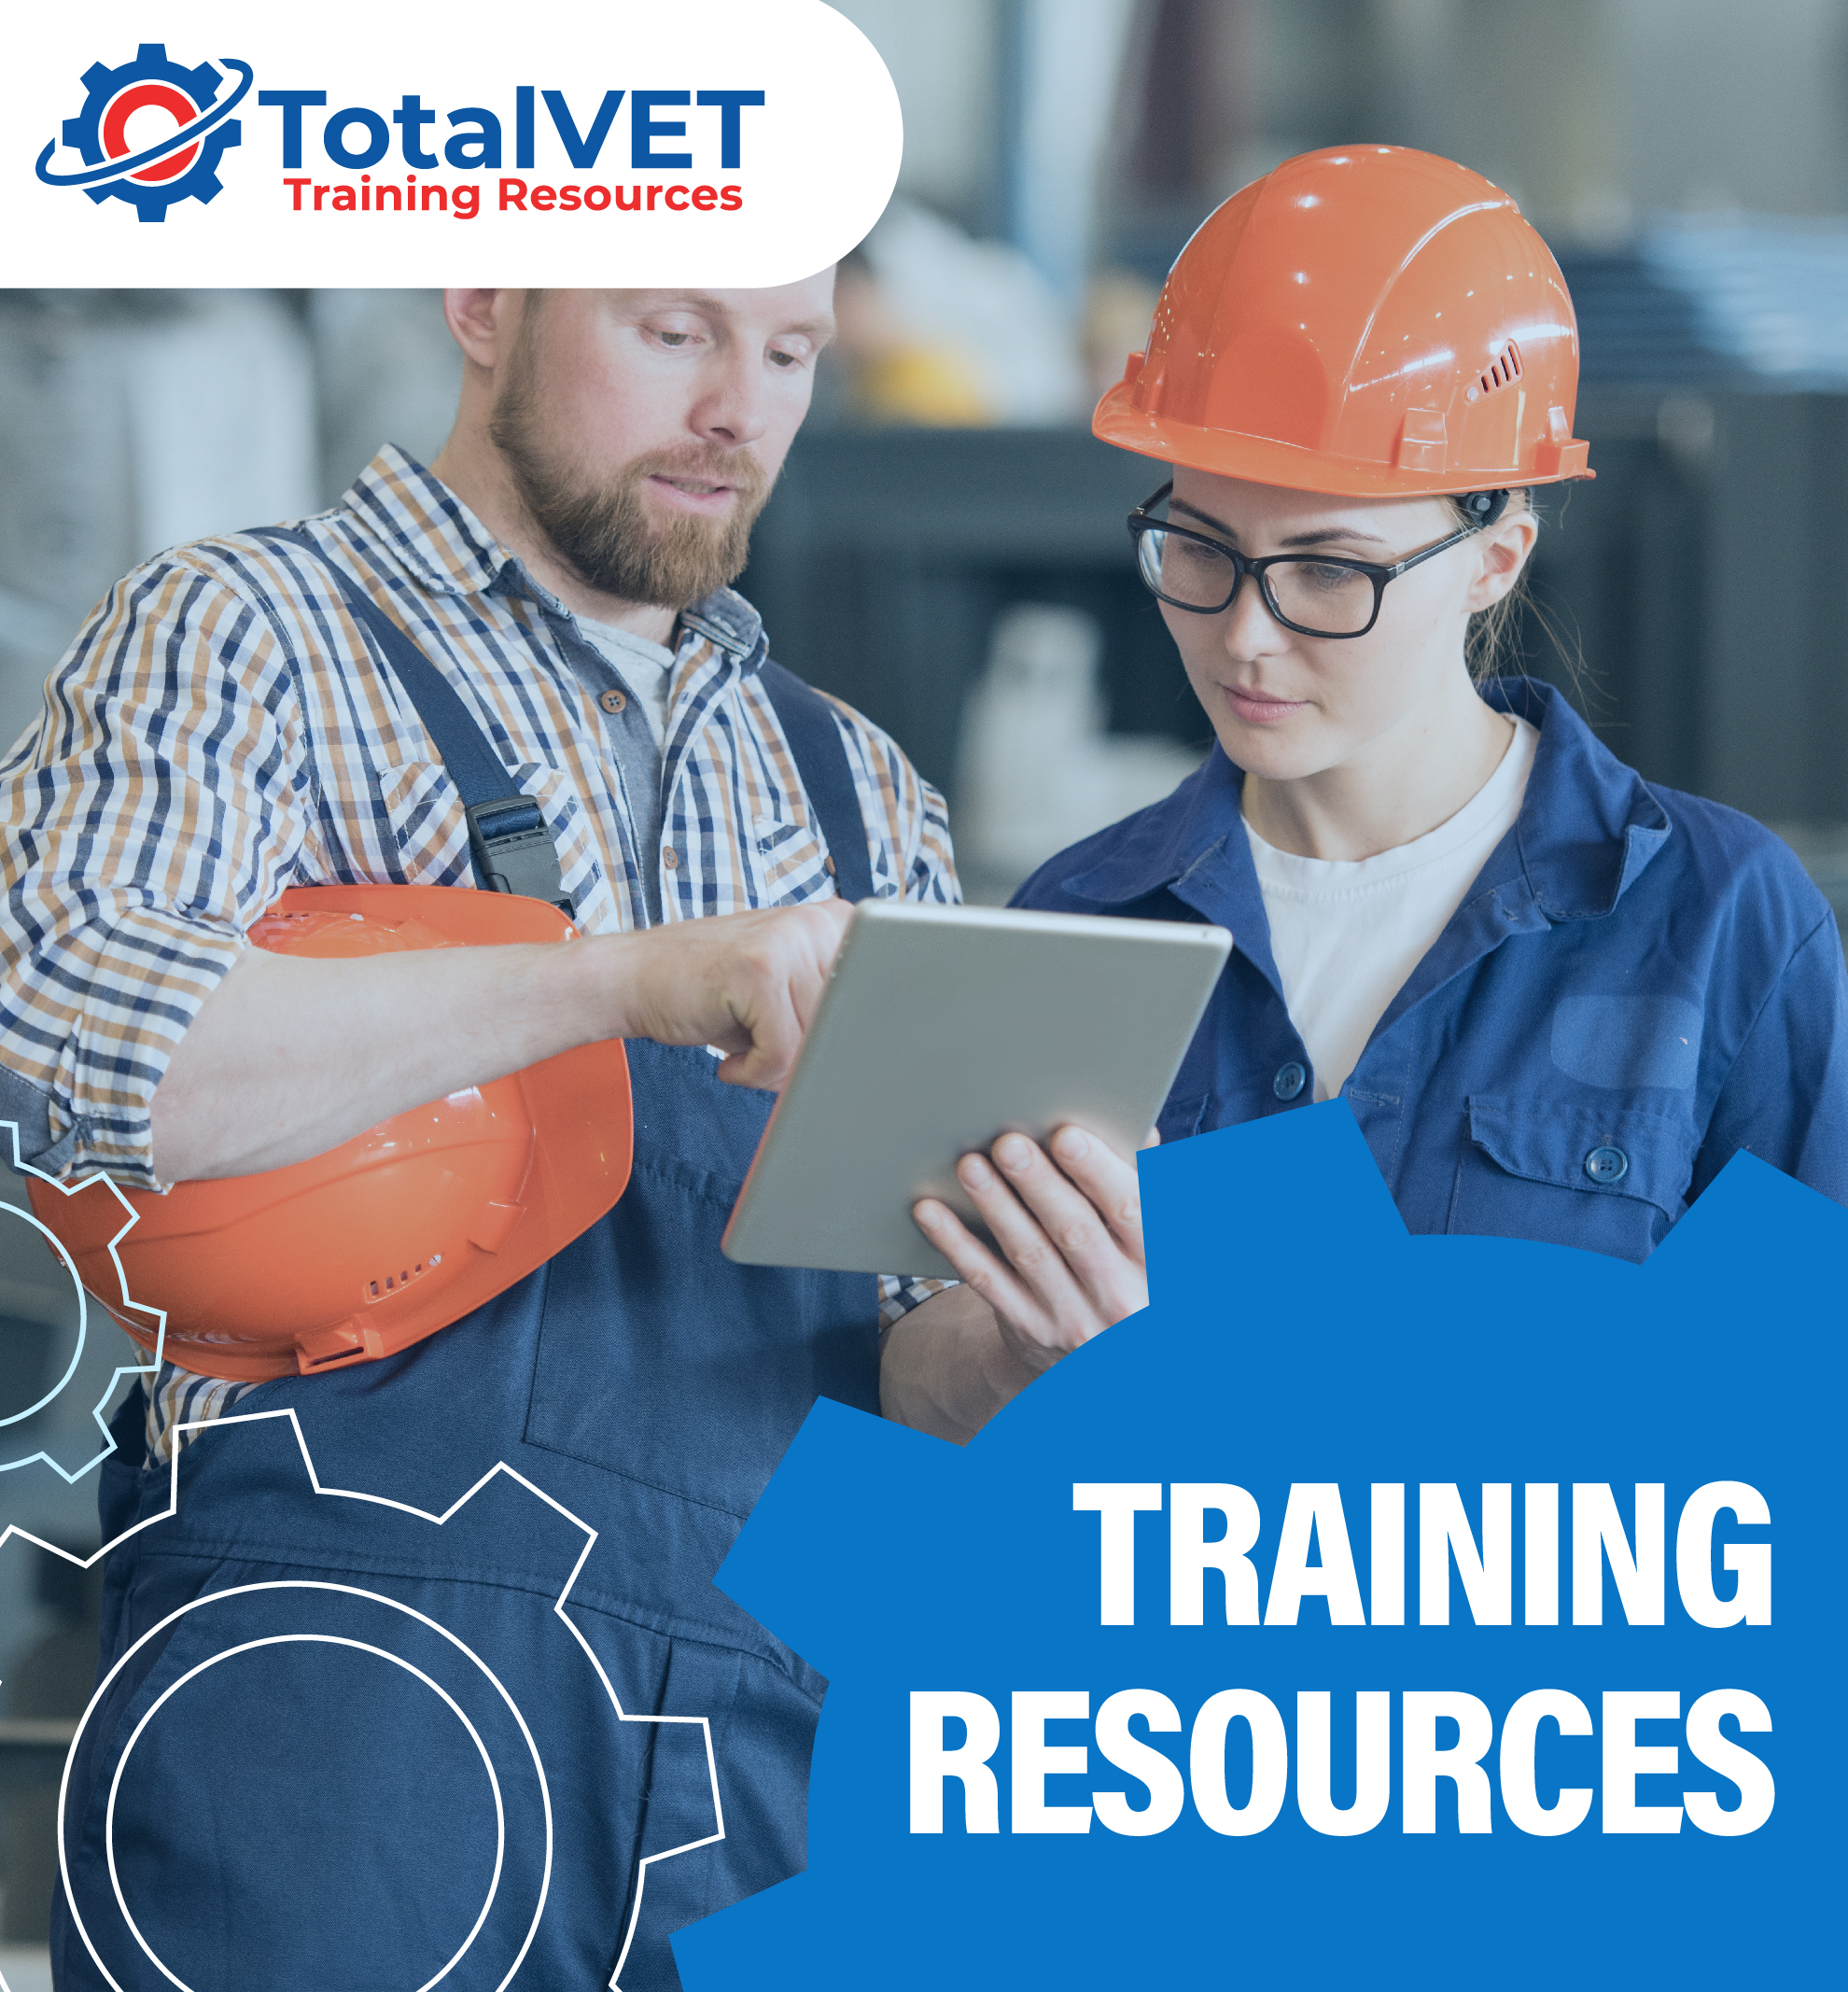 totalvet training resources and learning materials